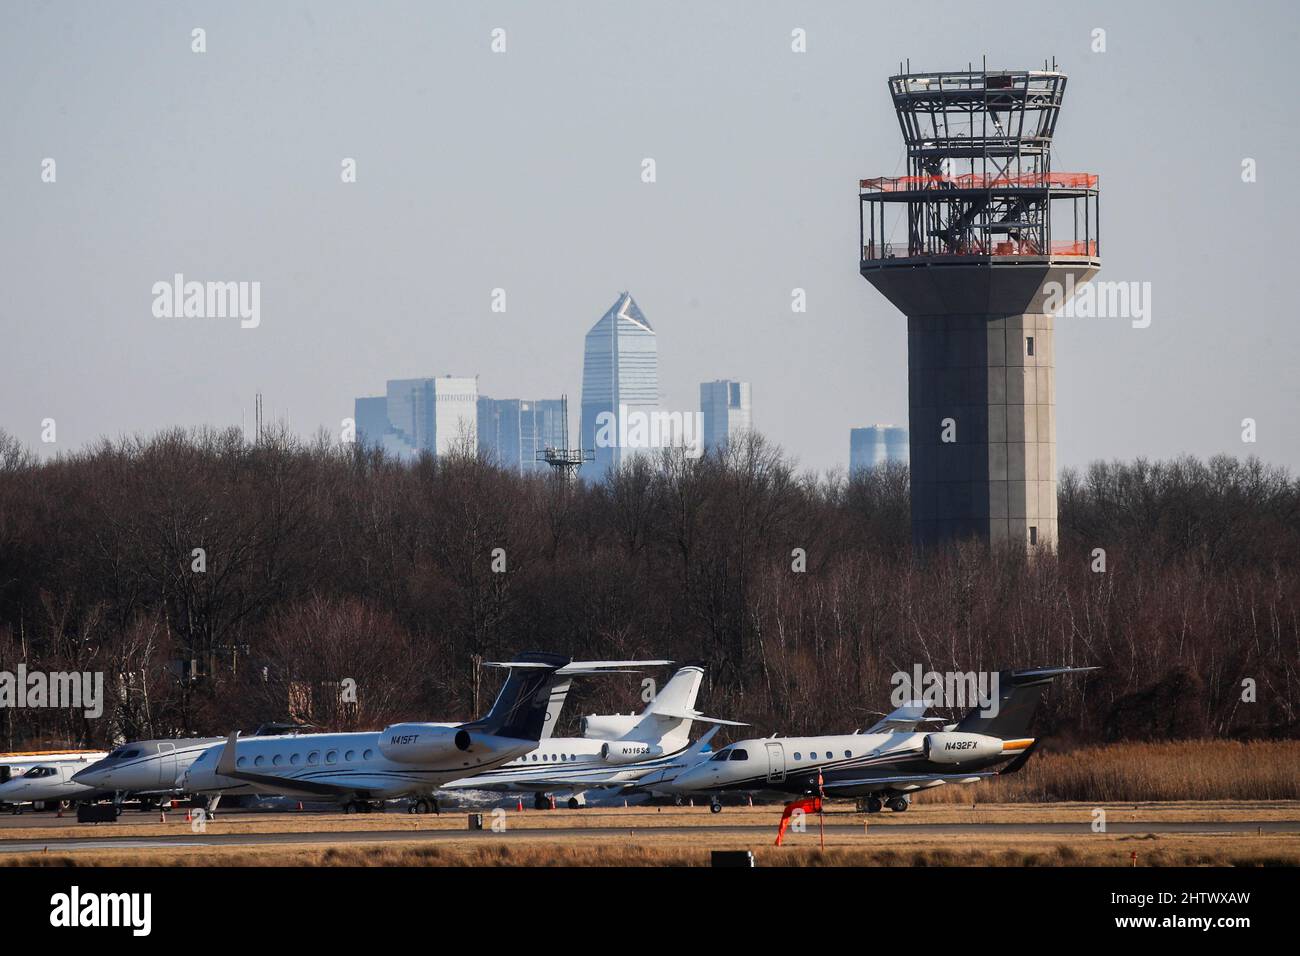 Jets are seen at the tarmac of the Teterboro Airport in Teterboro, New  Jersey, U.S., March 2, 2022. REUTERS/Eduardo Munoz Stock Photo - Alamy